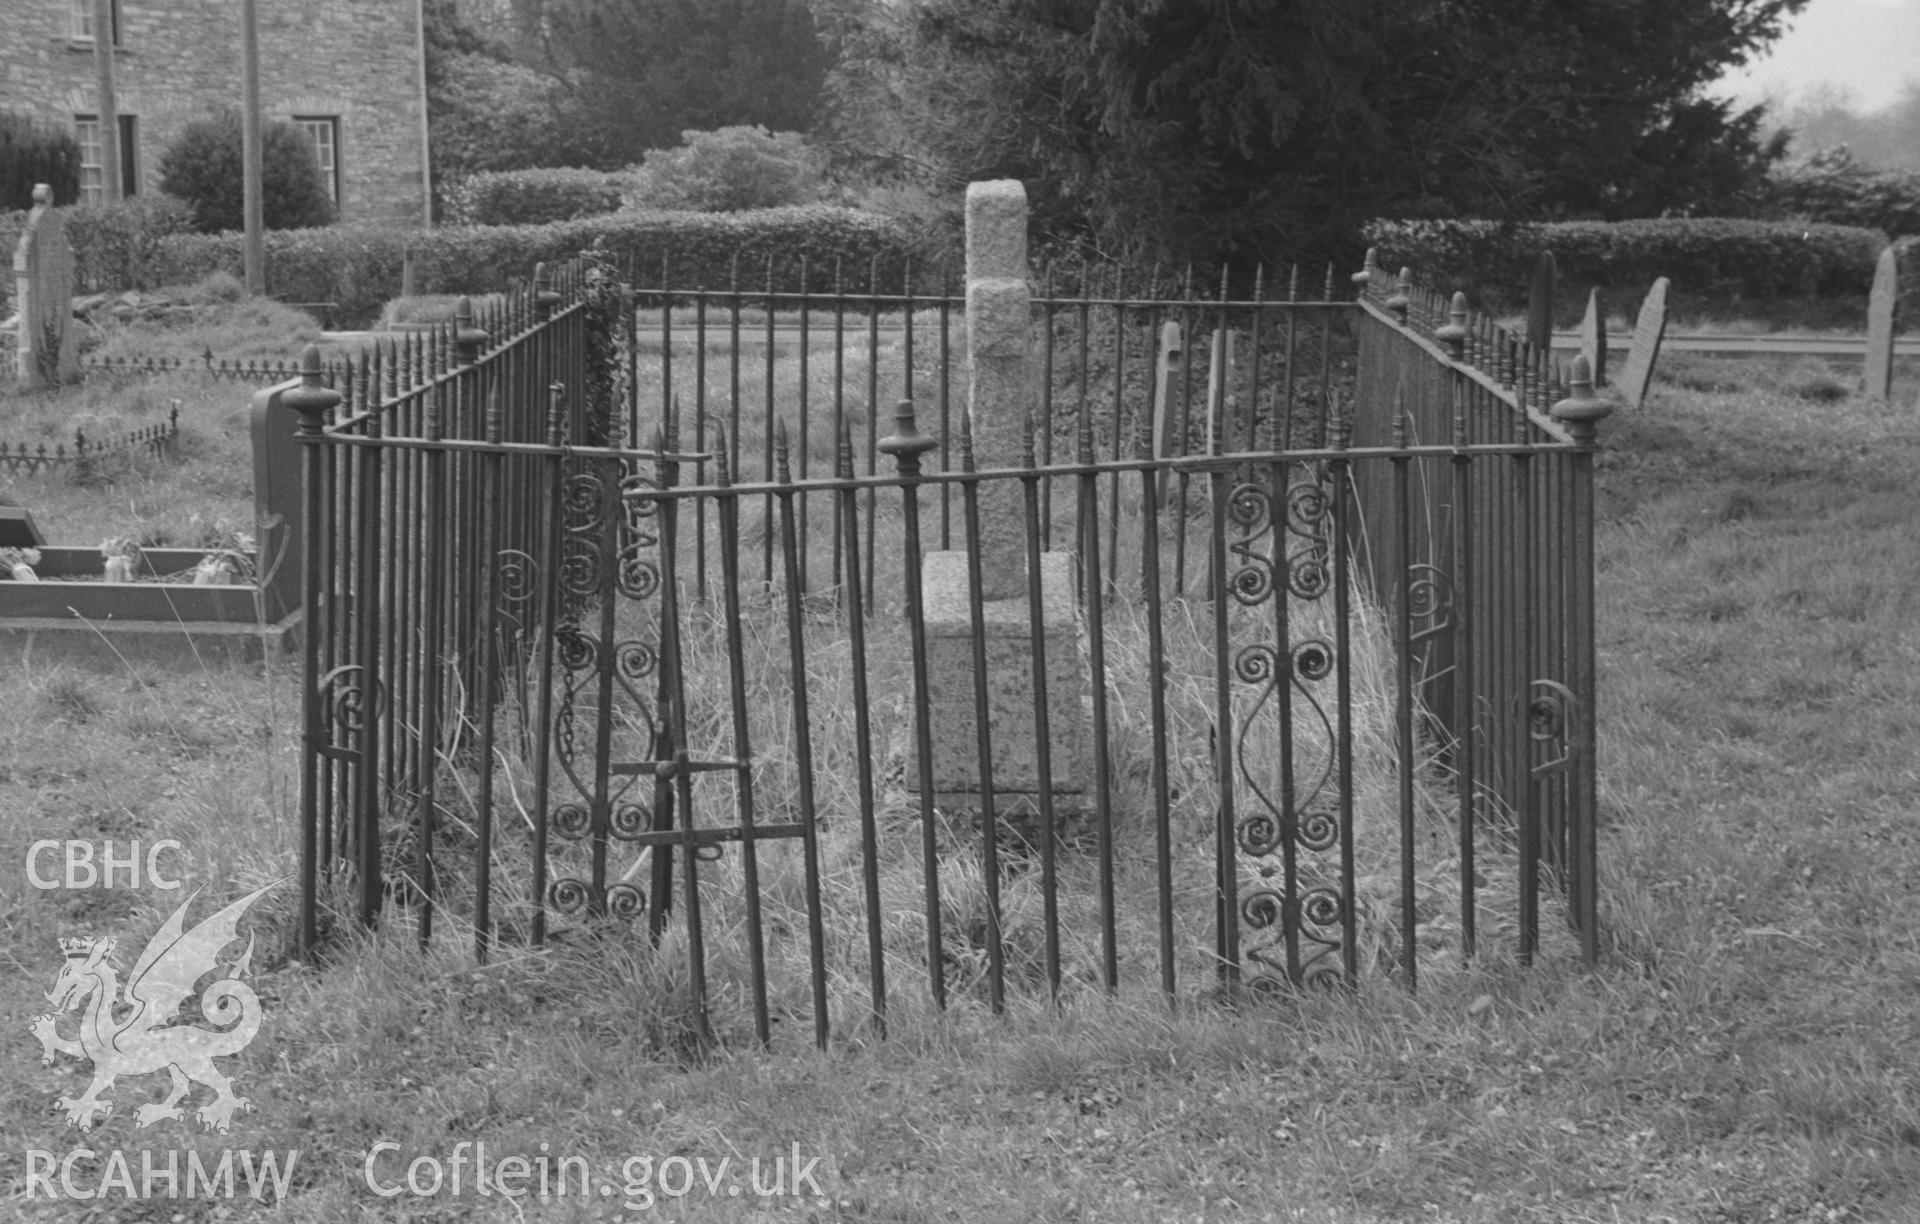 Digital copy of a black and white negative showing wrought iron grave enclosures in churchyard at St Hilary's Church, Trefilan. Photographed by Arthur O. Chater on 11th April 1967 from Grid Reference SN 550 572.